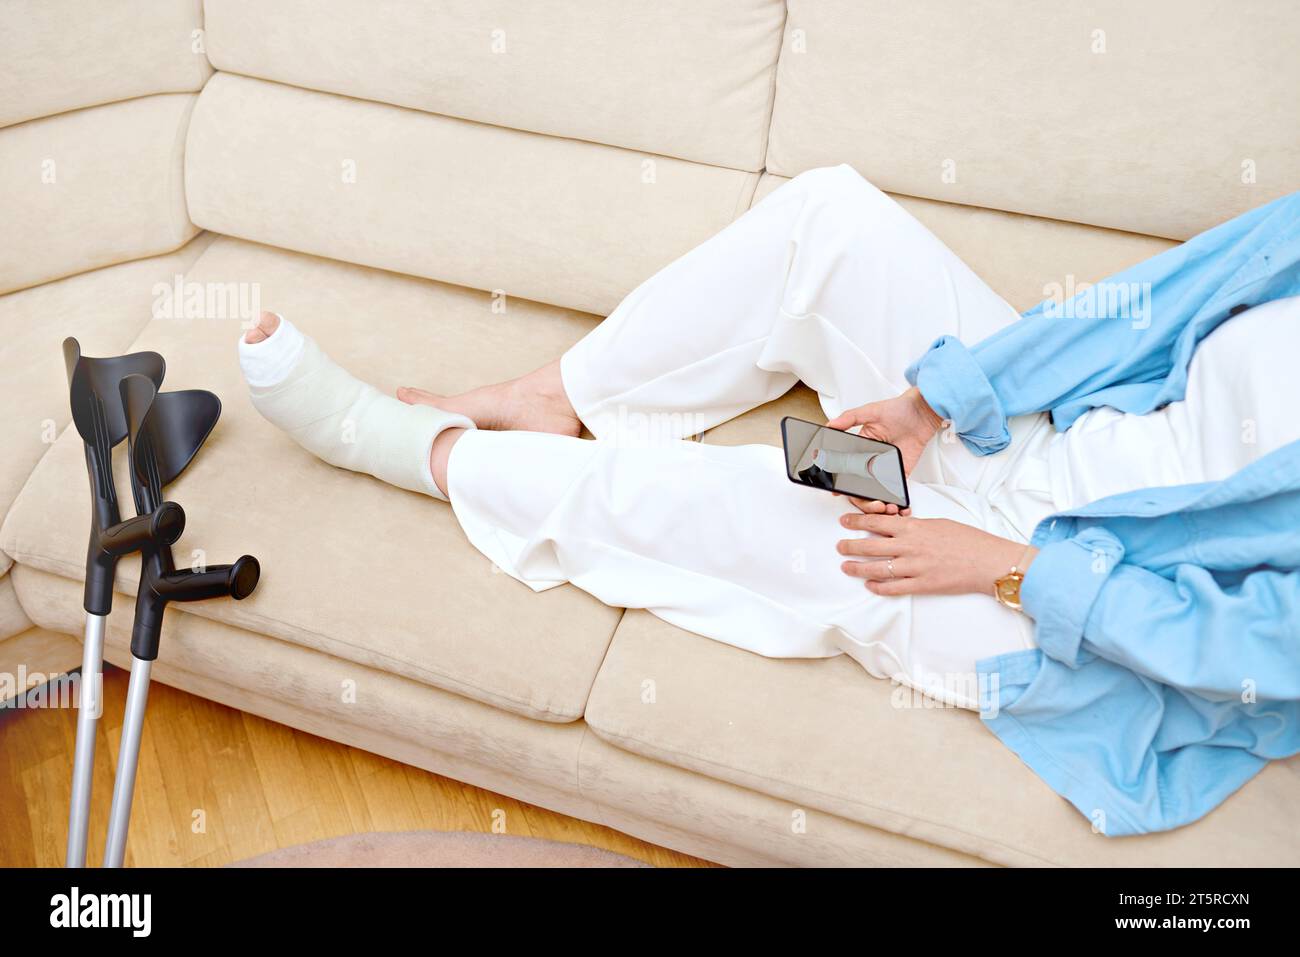 Woman makes a photo of her broken foot for insurance compensation. Female resting on the couch at home with a cast on her fractured leg using a phone. Stock Photo